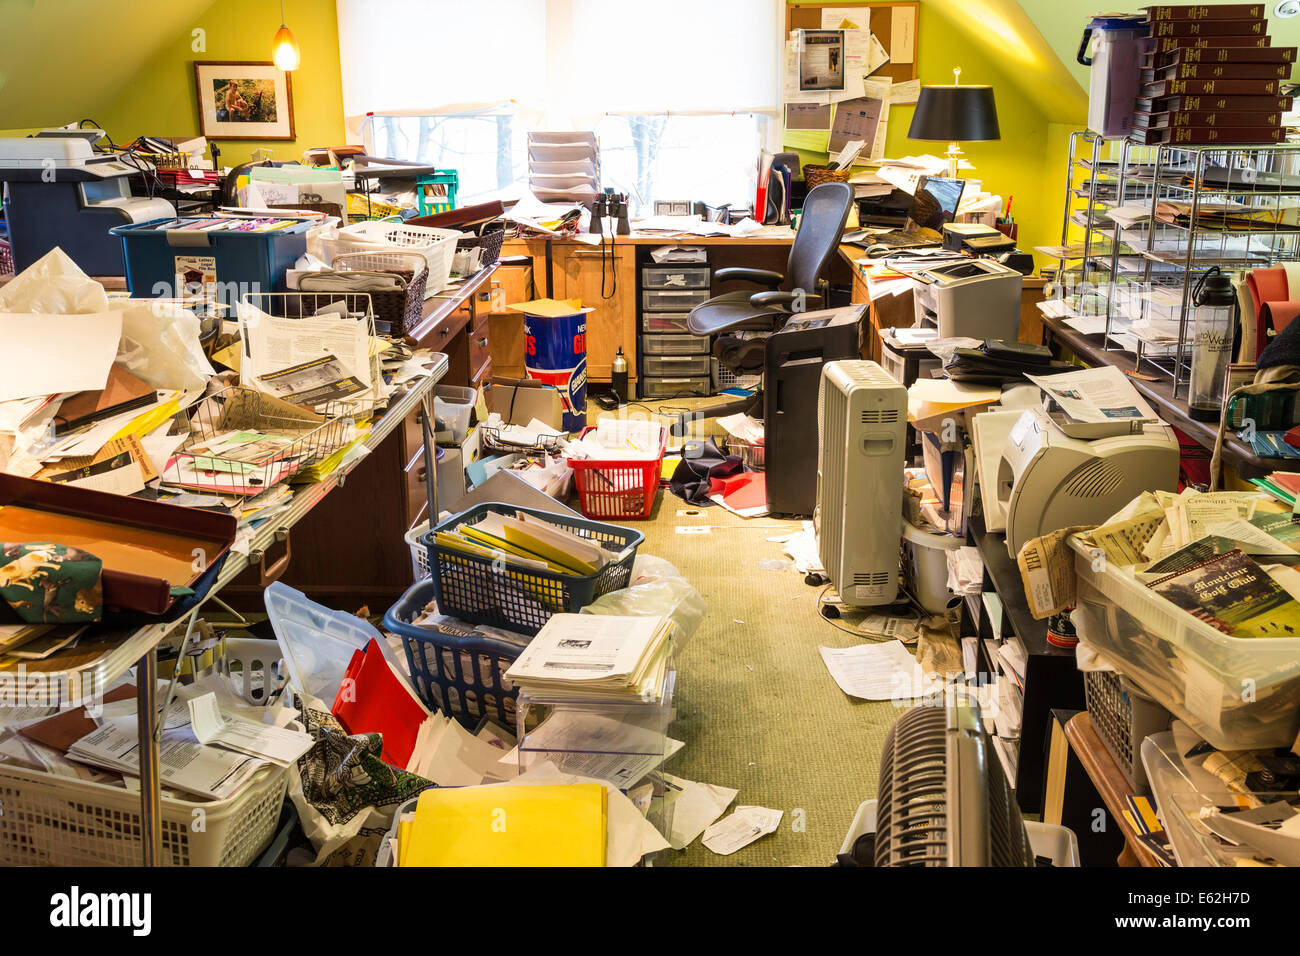 Hoarders' Messy Home Office, USA Stock Photo - Alamy